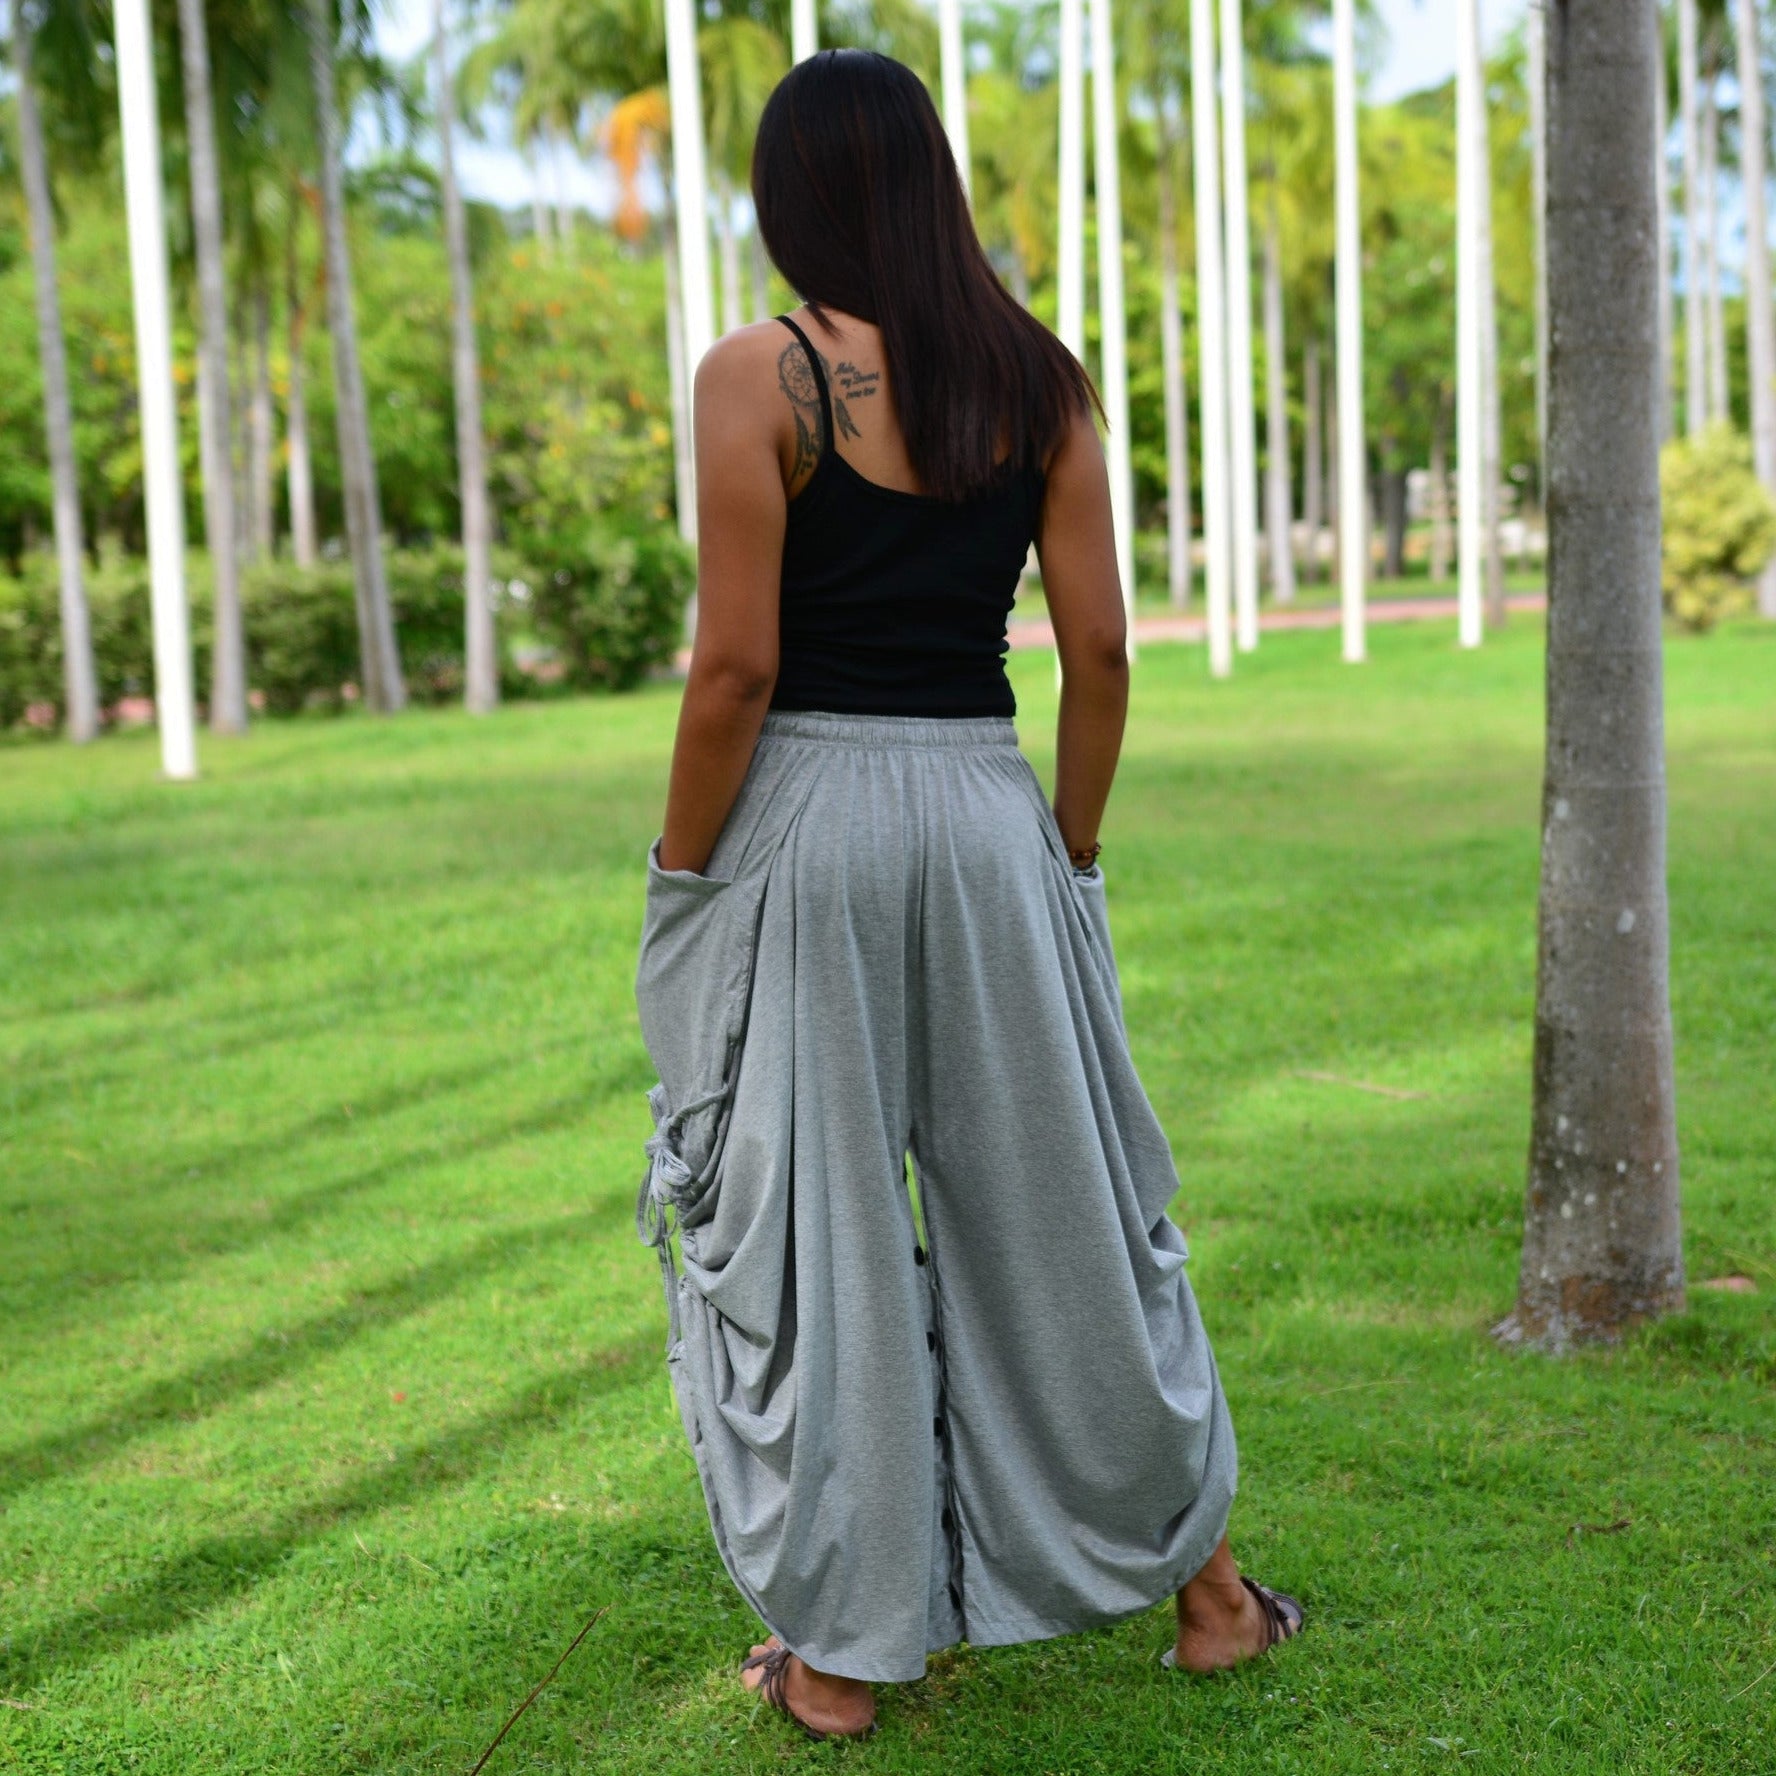 How To Turn a Pair Of Pants Into An Elegant Maxi Skirt with A Sexy SideSlit  | @Colleen G Lea - FSBTV - YouTube